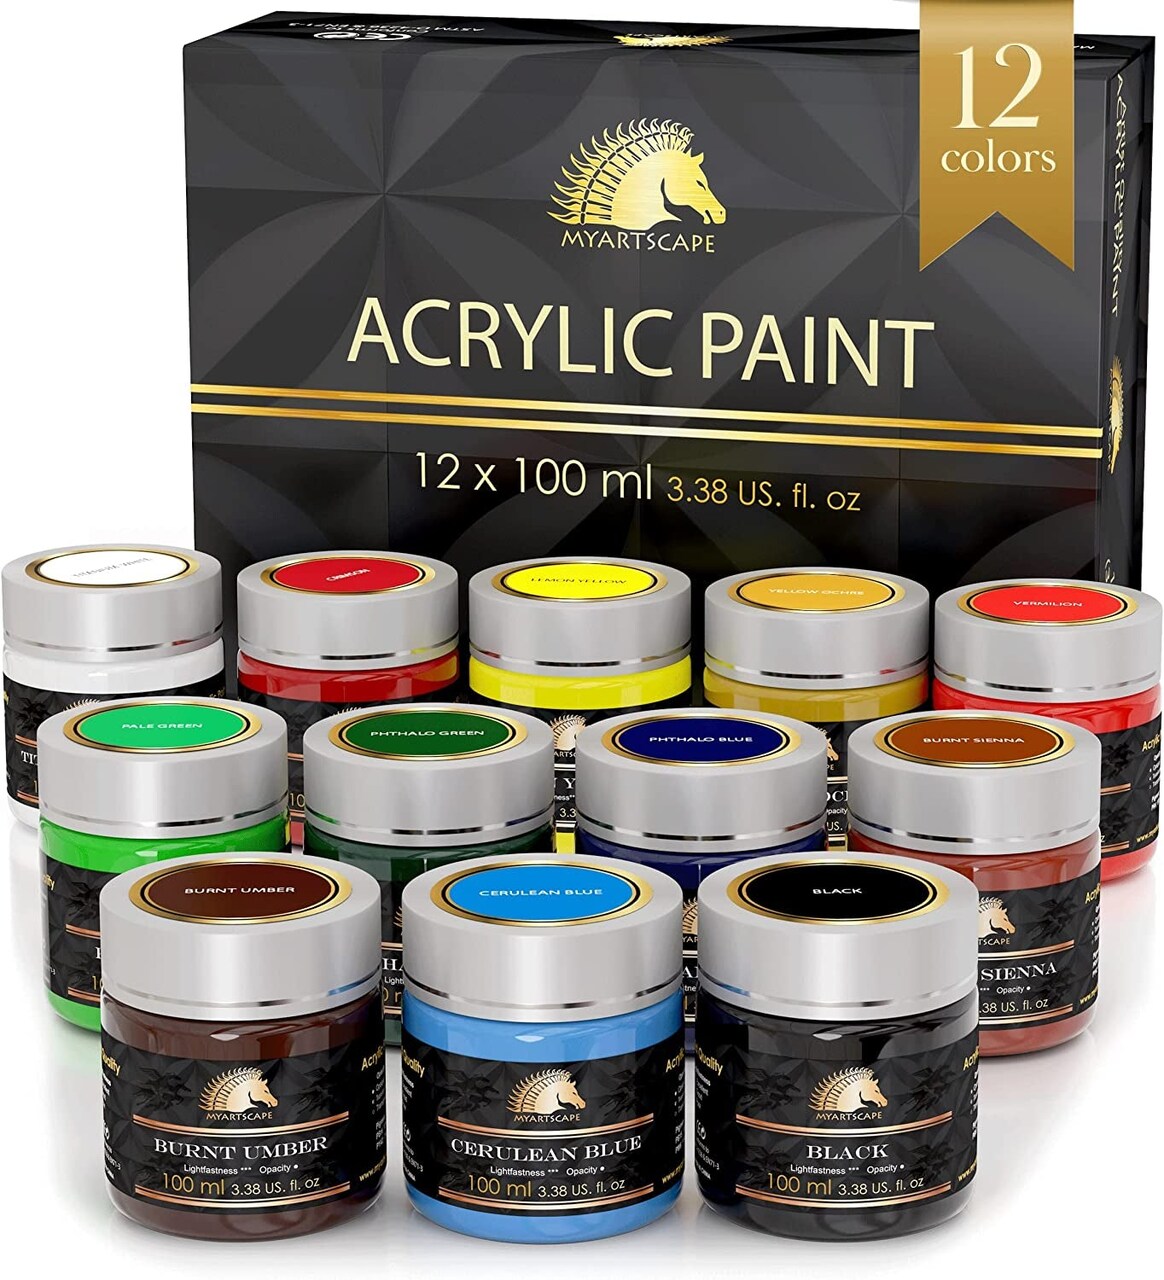 Acrylic Paint Set - 12 X 100Ml Bottles - Artist Quality Paints - Lightfast - Heavy Body - Highly Pigmented Colors with Great Coverage - Professional Art Supplies